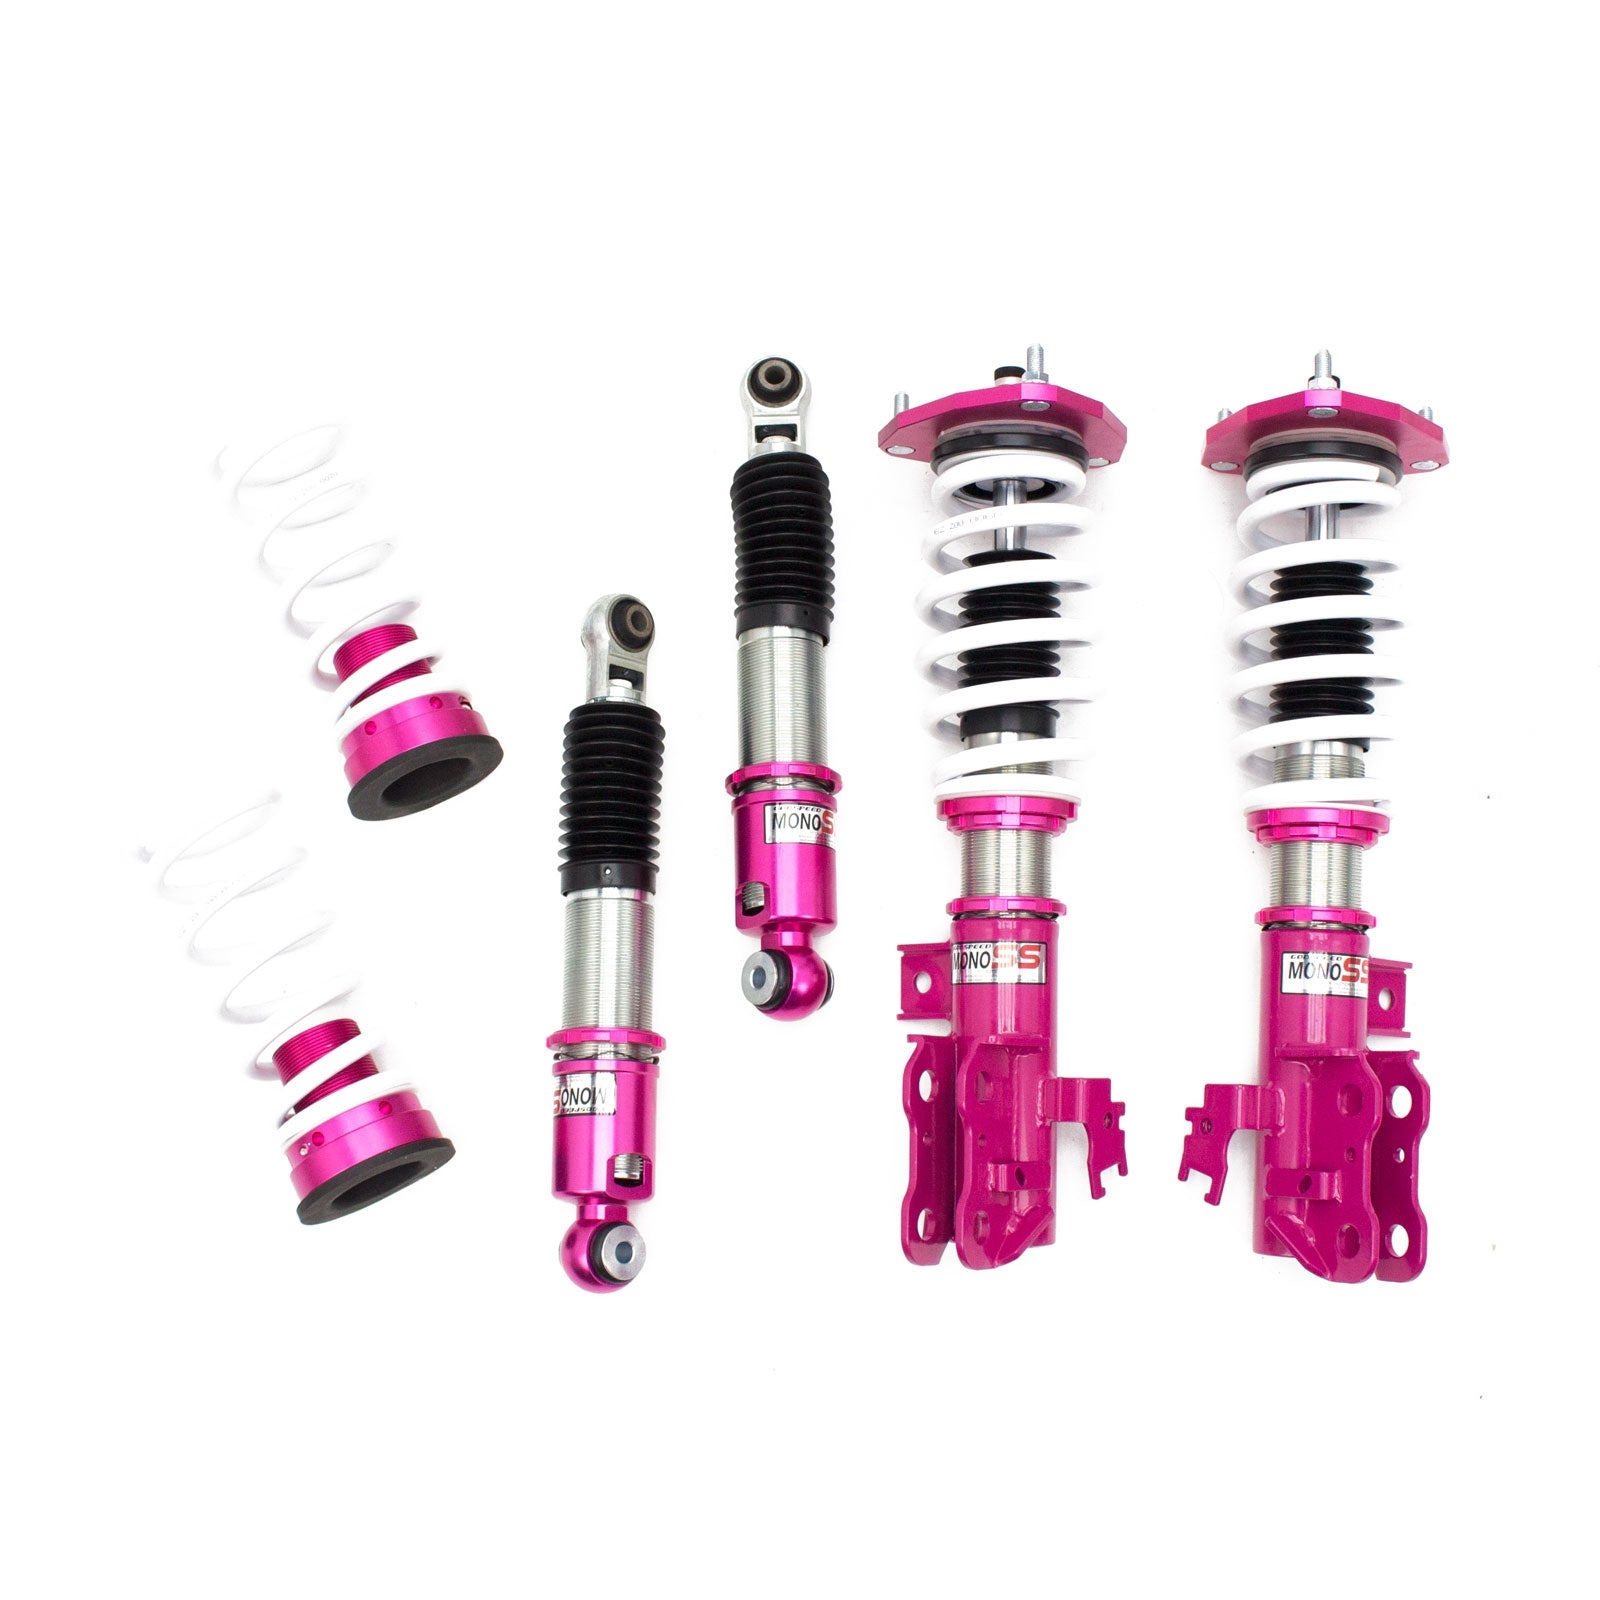 Godspeed(MSS0187) MonoSS Coilover Lowering Kit, Fully Adjustable, Ride Height, Spring Tension And 16 Click Damping, Toyota RAV4 2013-18